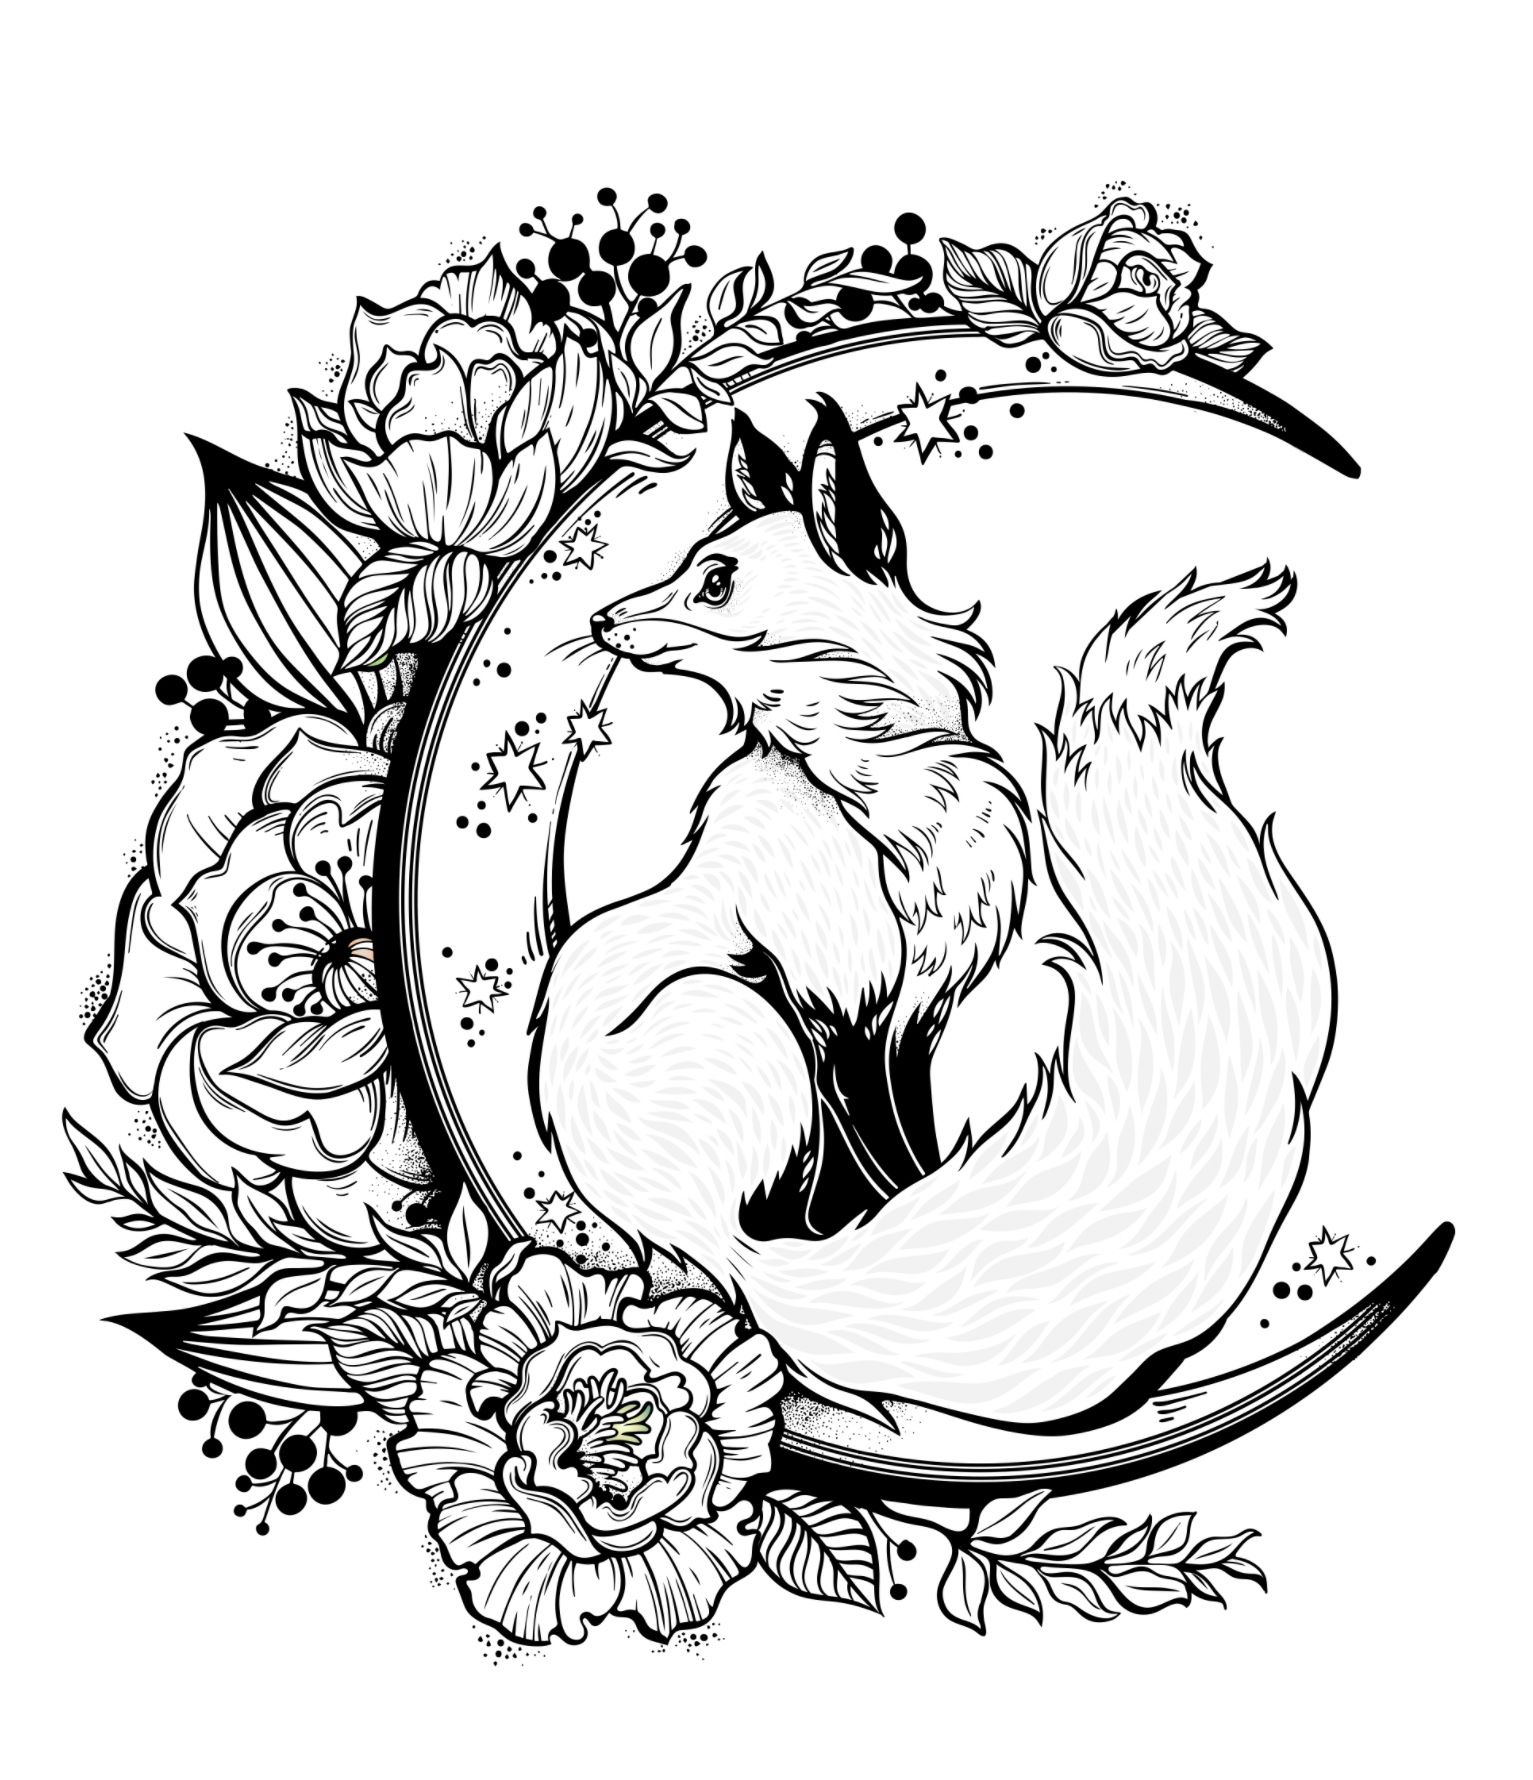 I love this fox coloring pic just beautiful fox coloring page coloring book art dragon coloring page